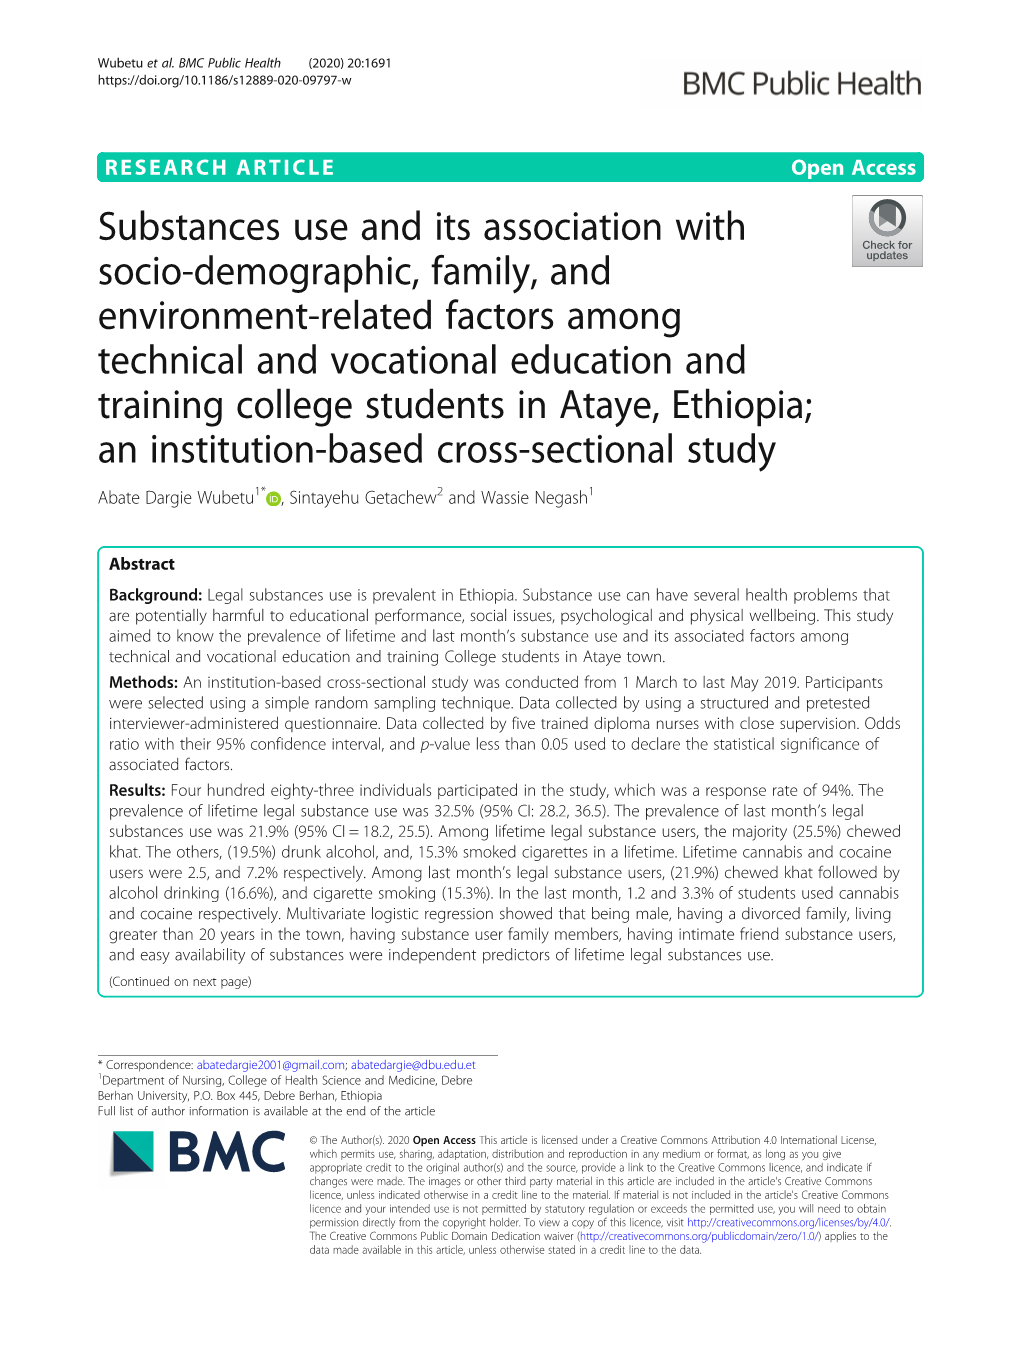 Substances Use and Its Association with Socio-Demographic, Family, And